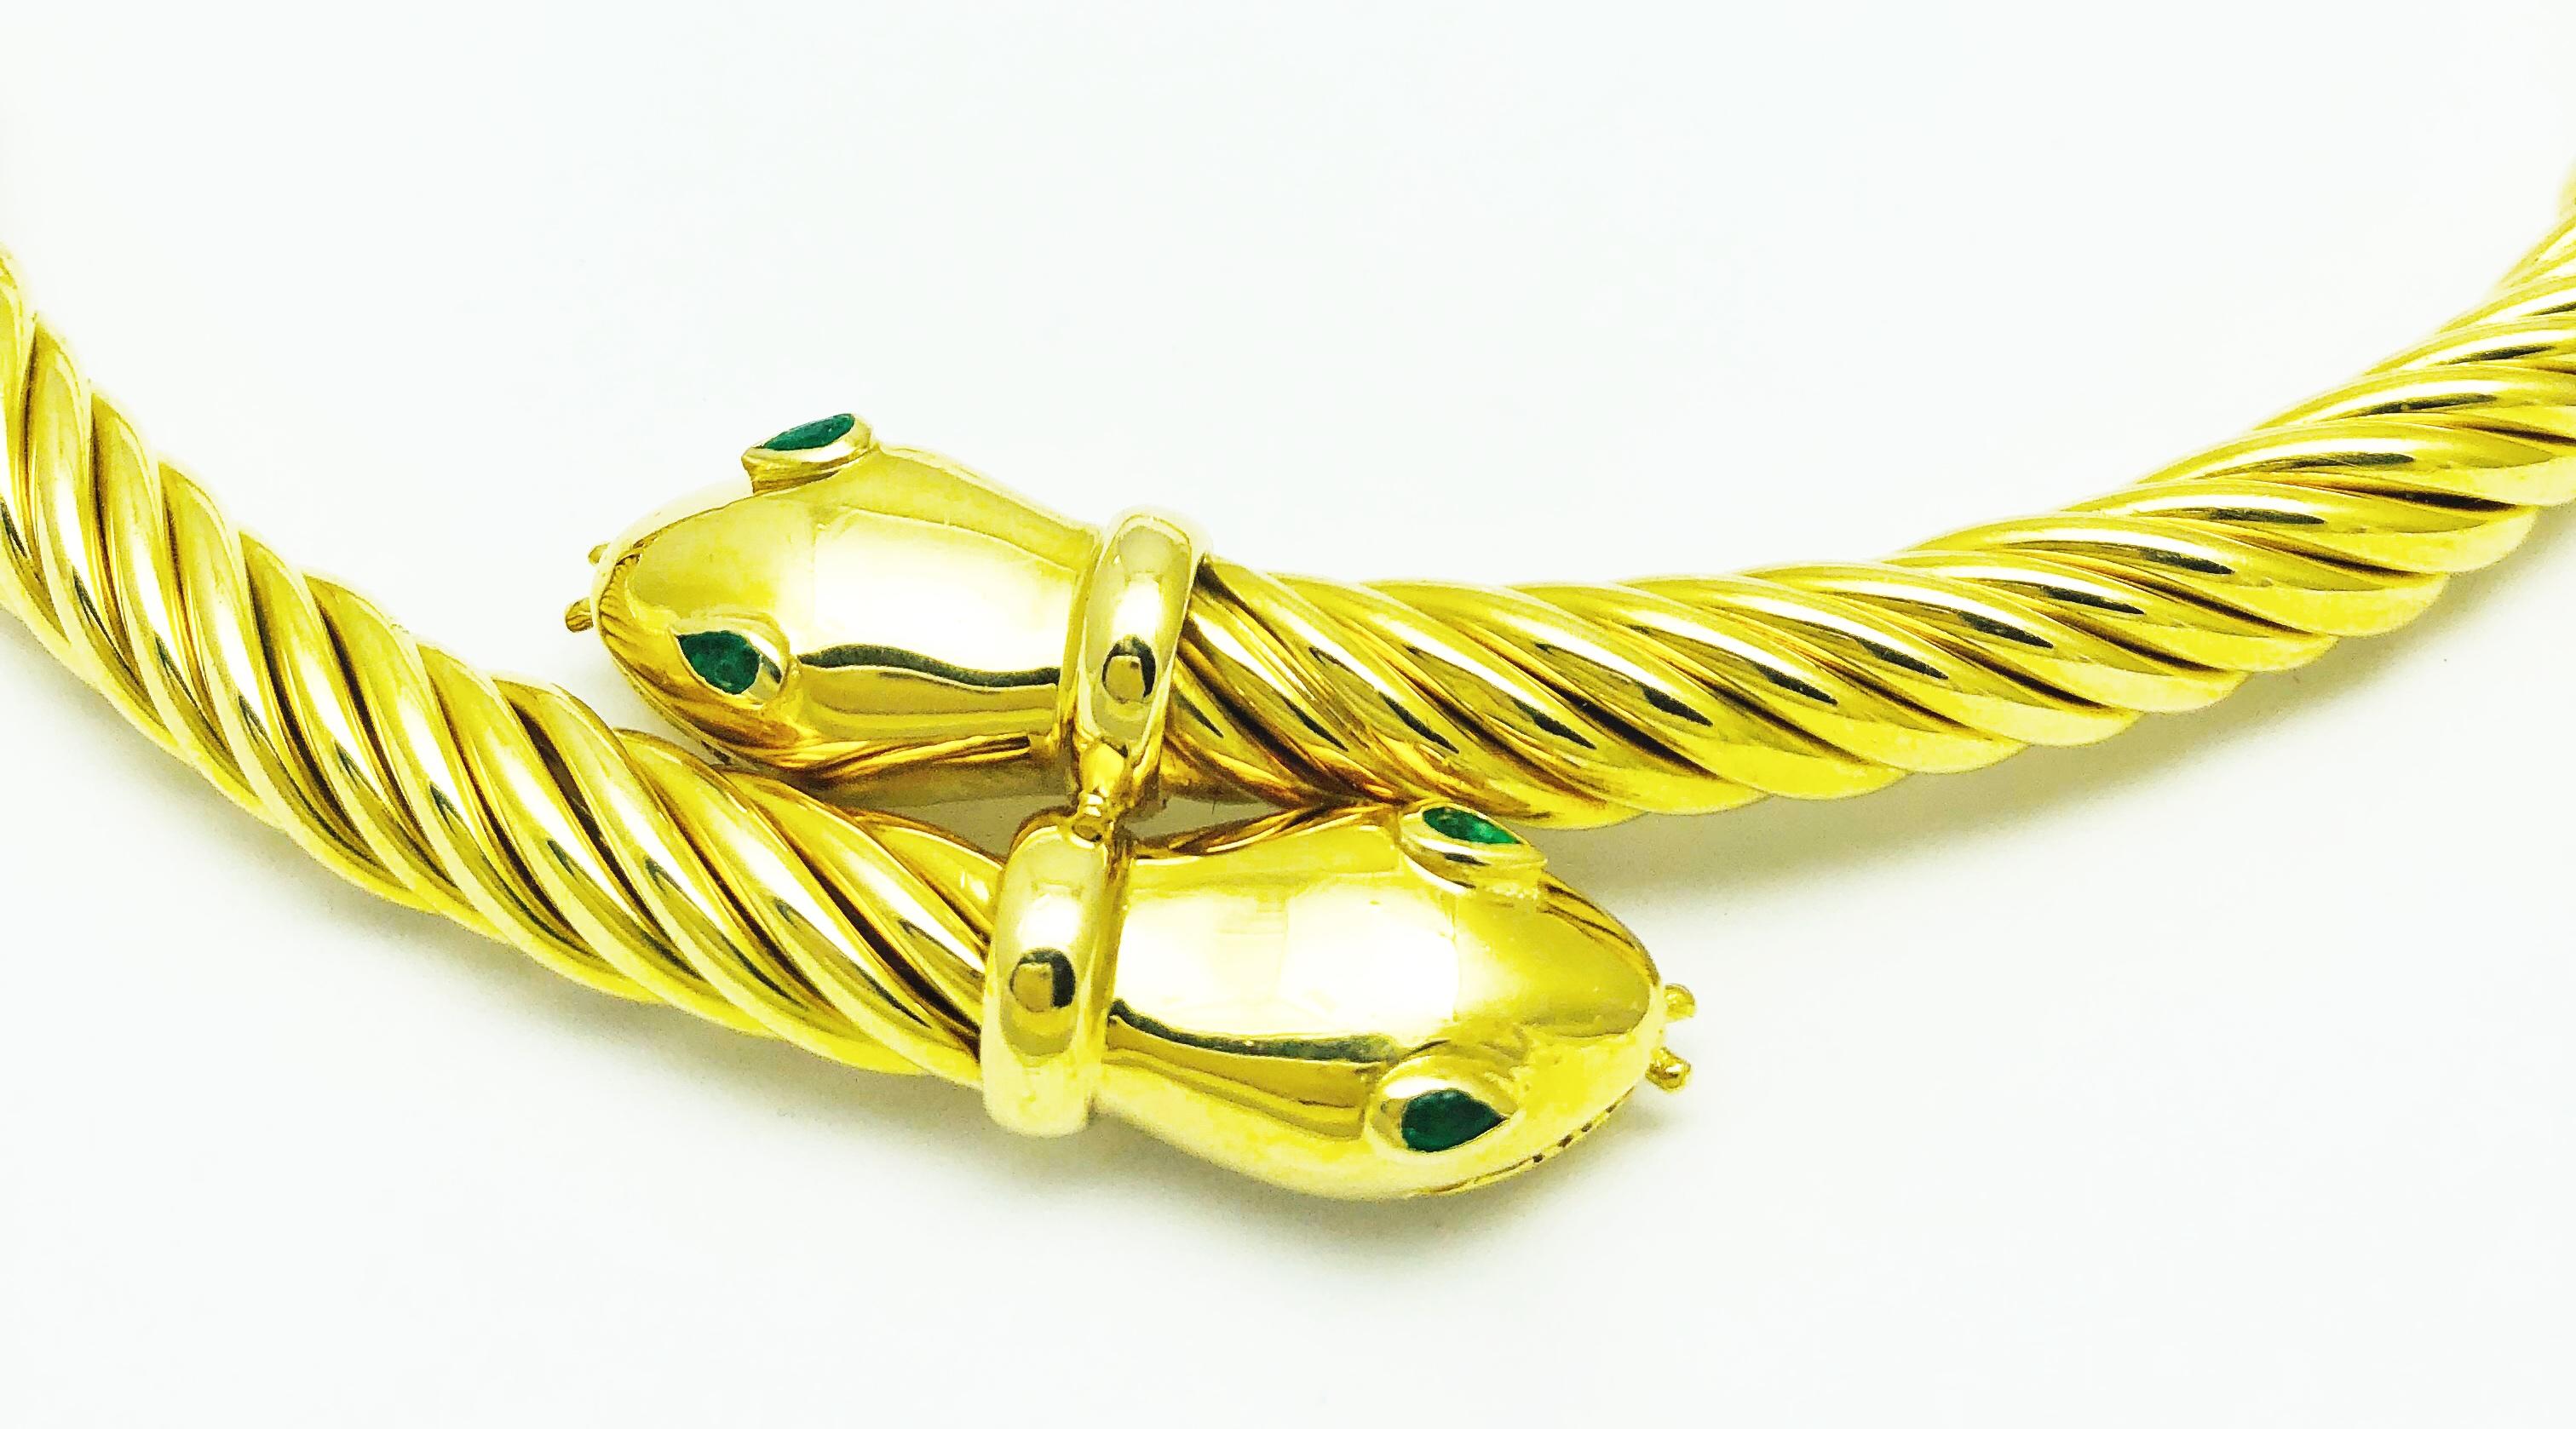 This is an absolutely Stunning Necklace! Made in 18K Yellow Gold, this double headed snake necklace is an 8mm cable link that is 17 inches long and measures 135.1 grams. The snakes eyes are pear shaped emeralds. This very unique piece has beautiful